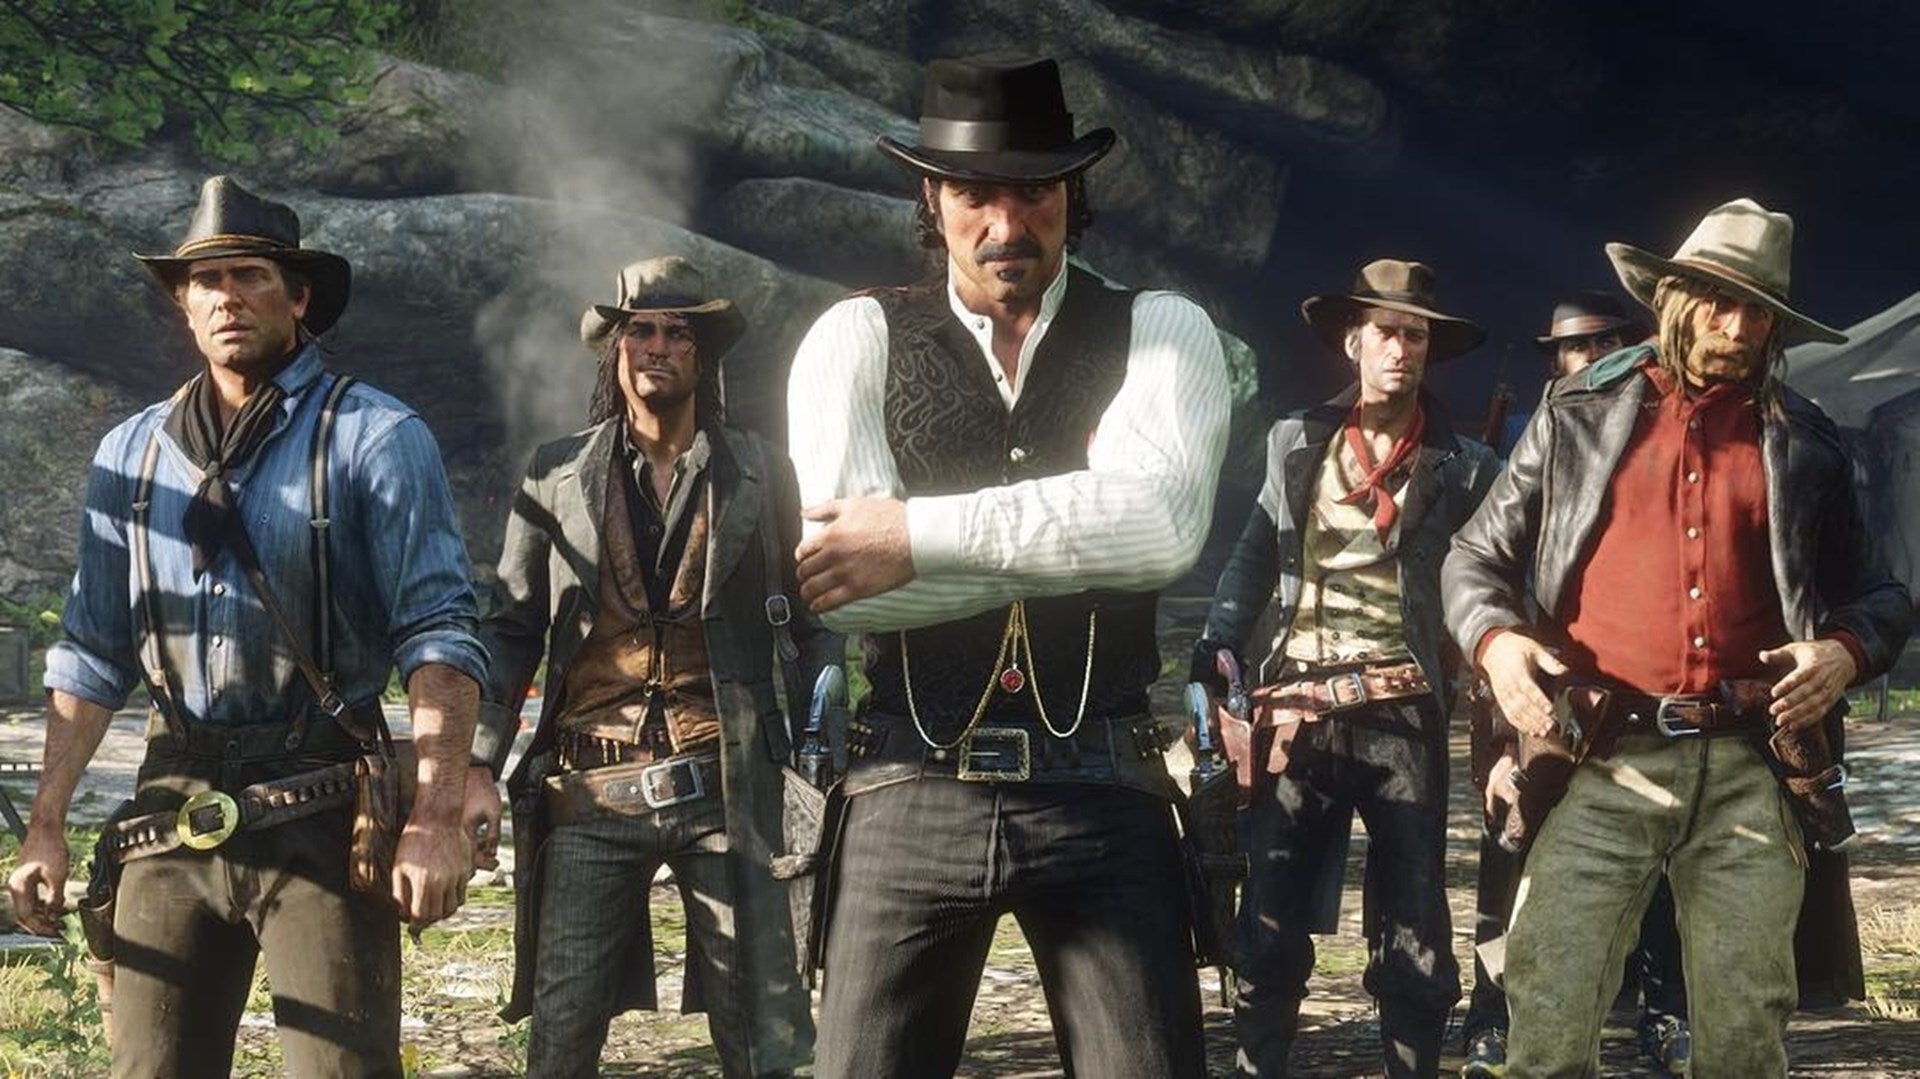 Red Dead Redemption 2 characters Susan O'Shea, Bell, others teased | VG247